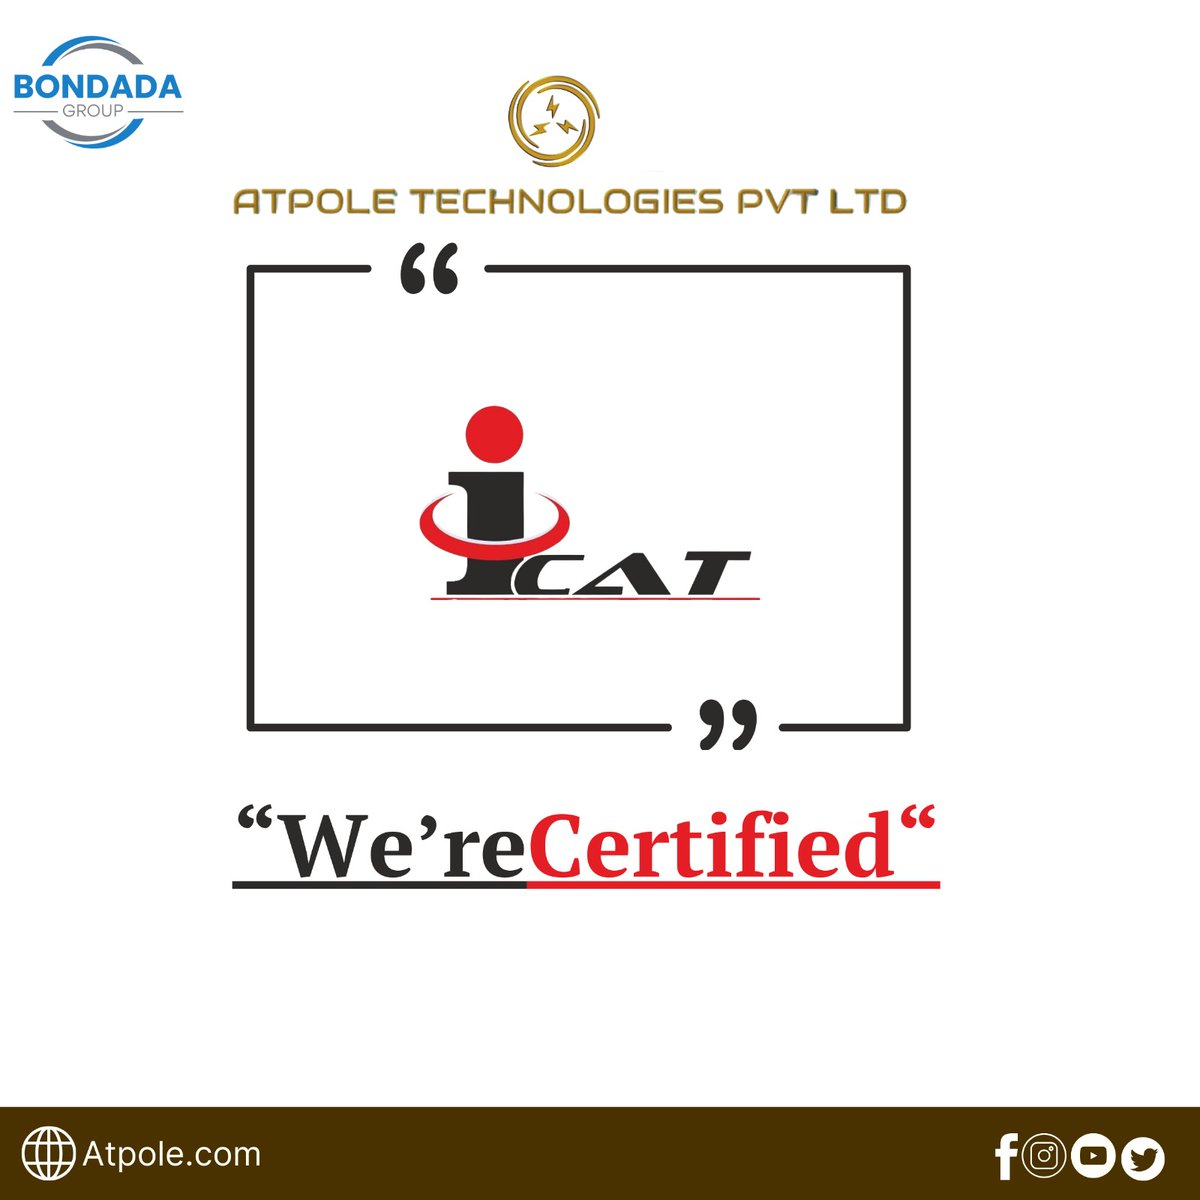 Exciting news alert! Atpole Technologies Pvt Ltd just clinched the prestigious 'icat' approval certification for our motors.
#AtpoleTech #QualityMatters #IndustryStandards  #MotorCertification #CertifiedSuccess #HighStandards #ClickLinkInBio #CelebrateSuccess #joinTheJourney